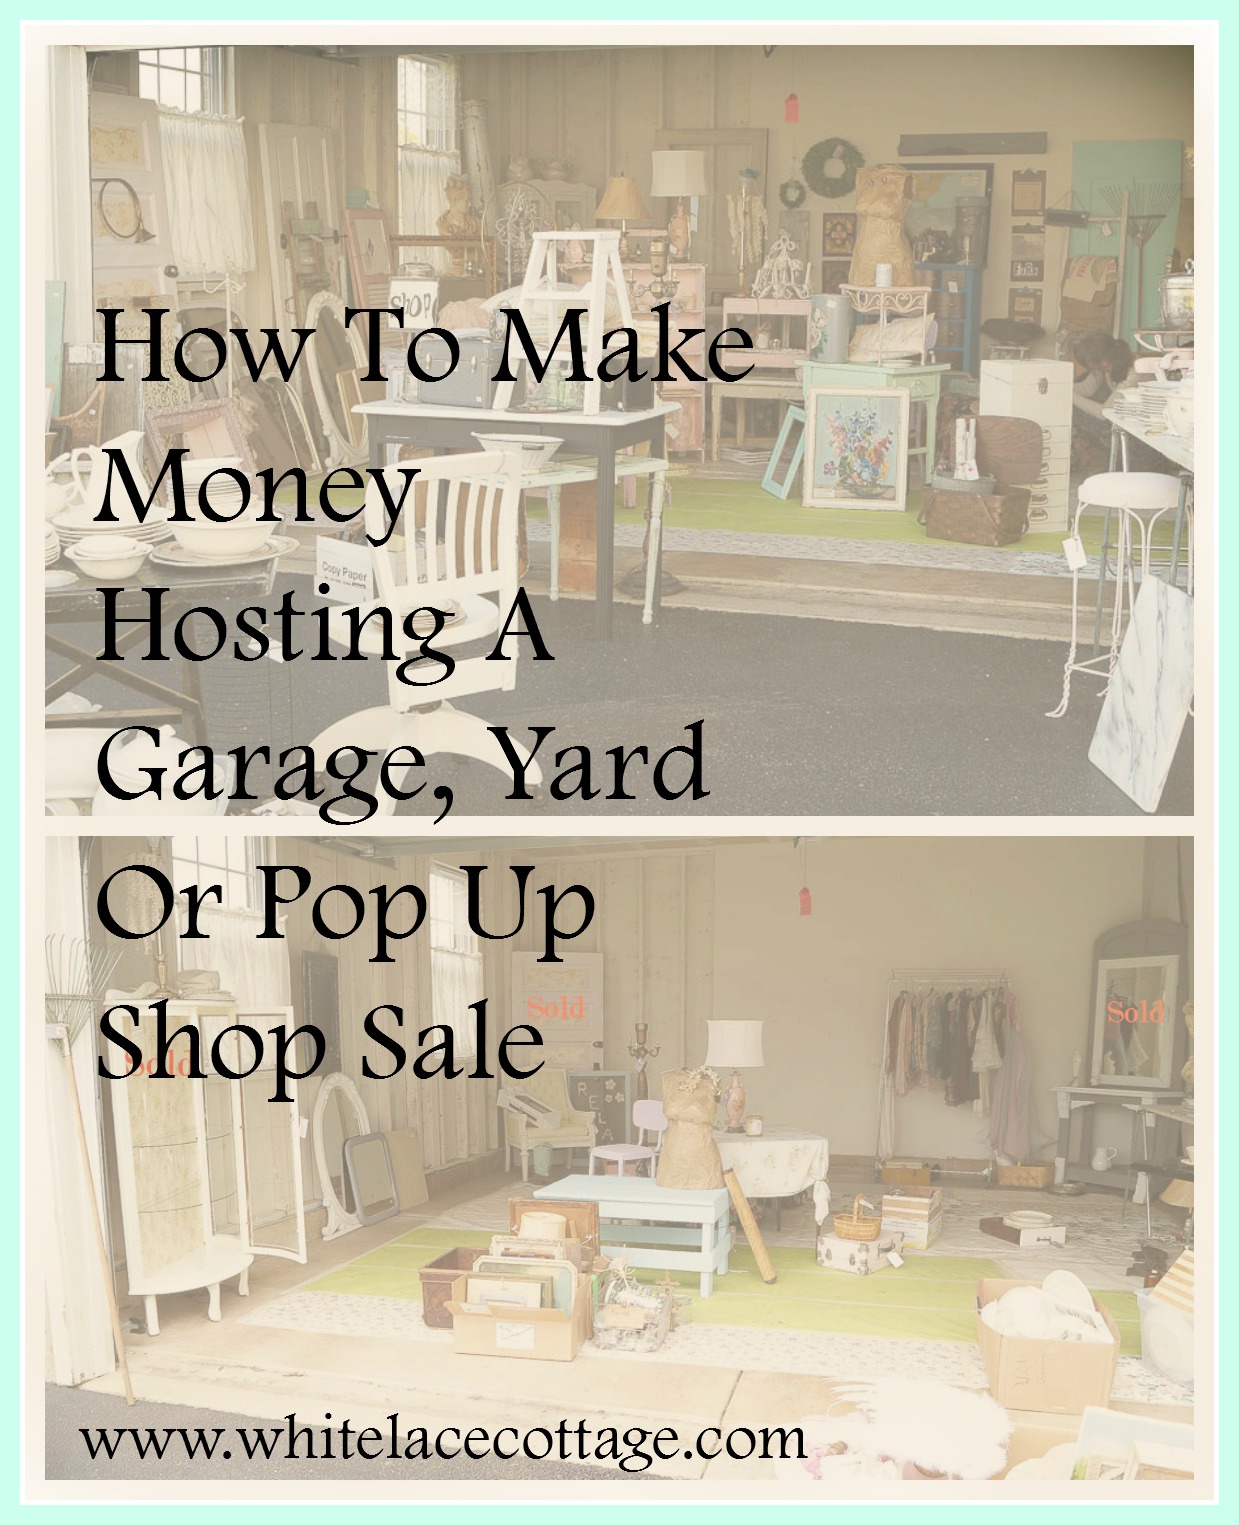 Make money hosting garage sales, it a great way to make extra money. I've hosted many of these over the years. I've learned from each one. I'm sharing tips on how to have a successful sale.